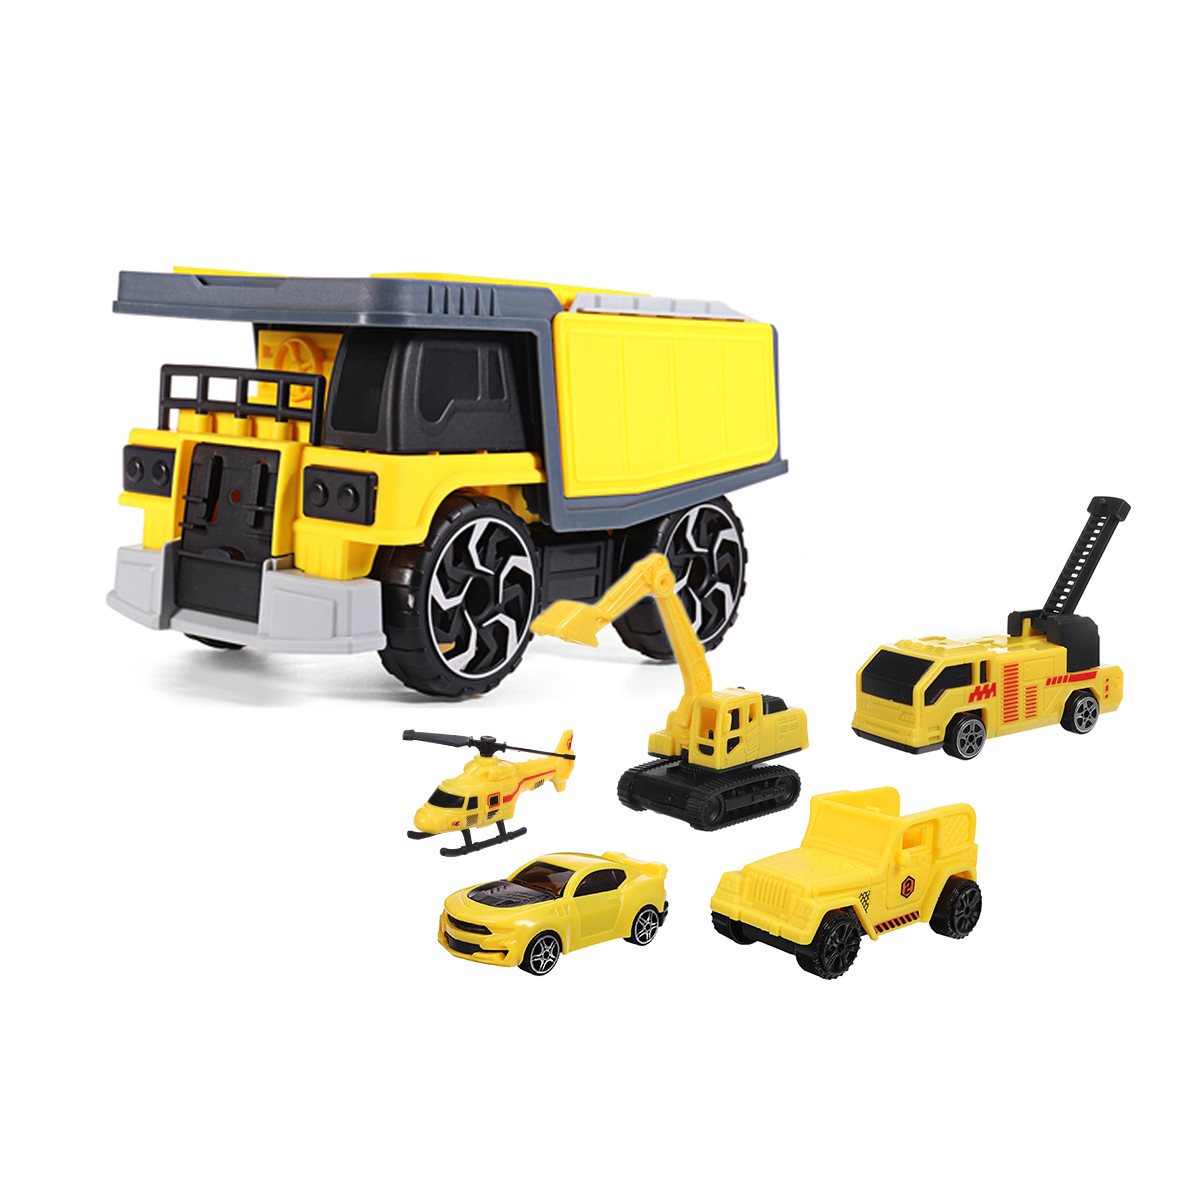 Simulation Inertia Deformation Track Engineering Vehicle Diecast Car Model Toy with Storage Parking Lot for Kids Birthdays Gift 1